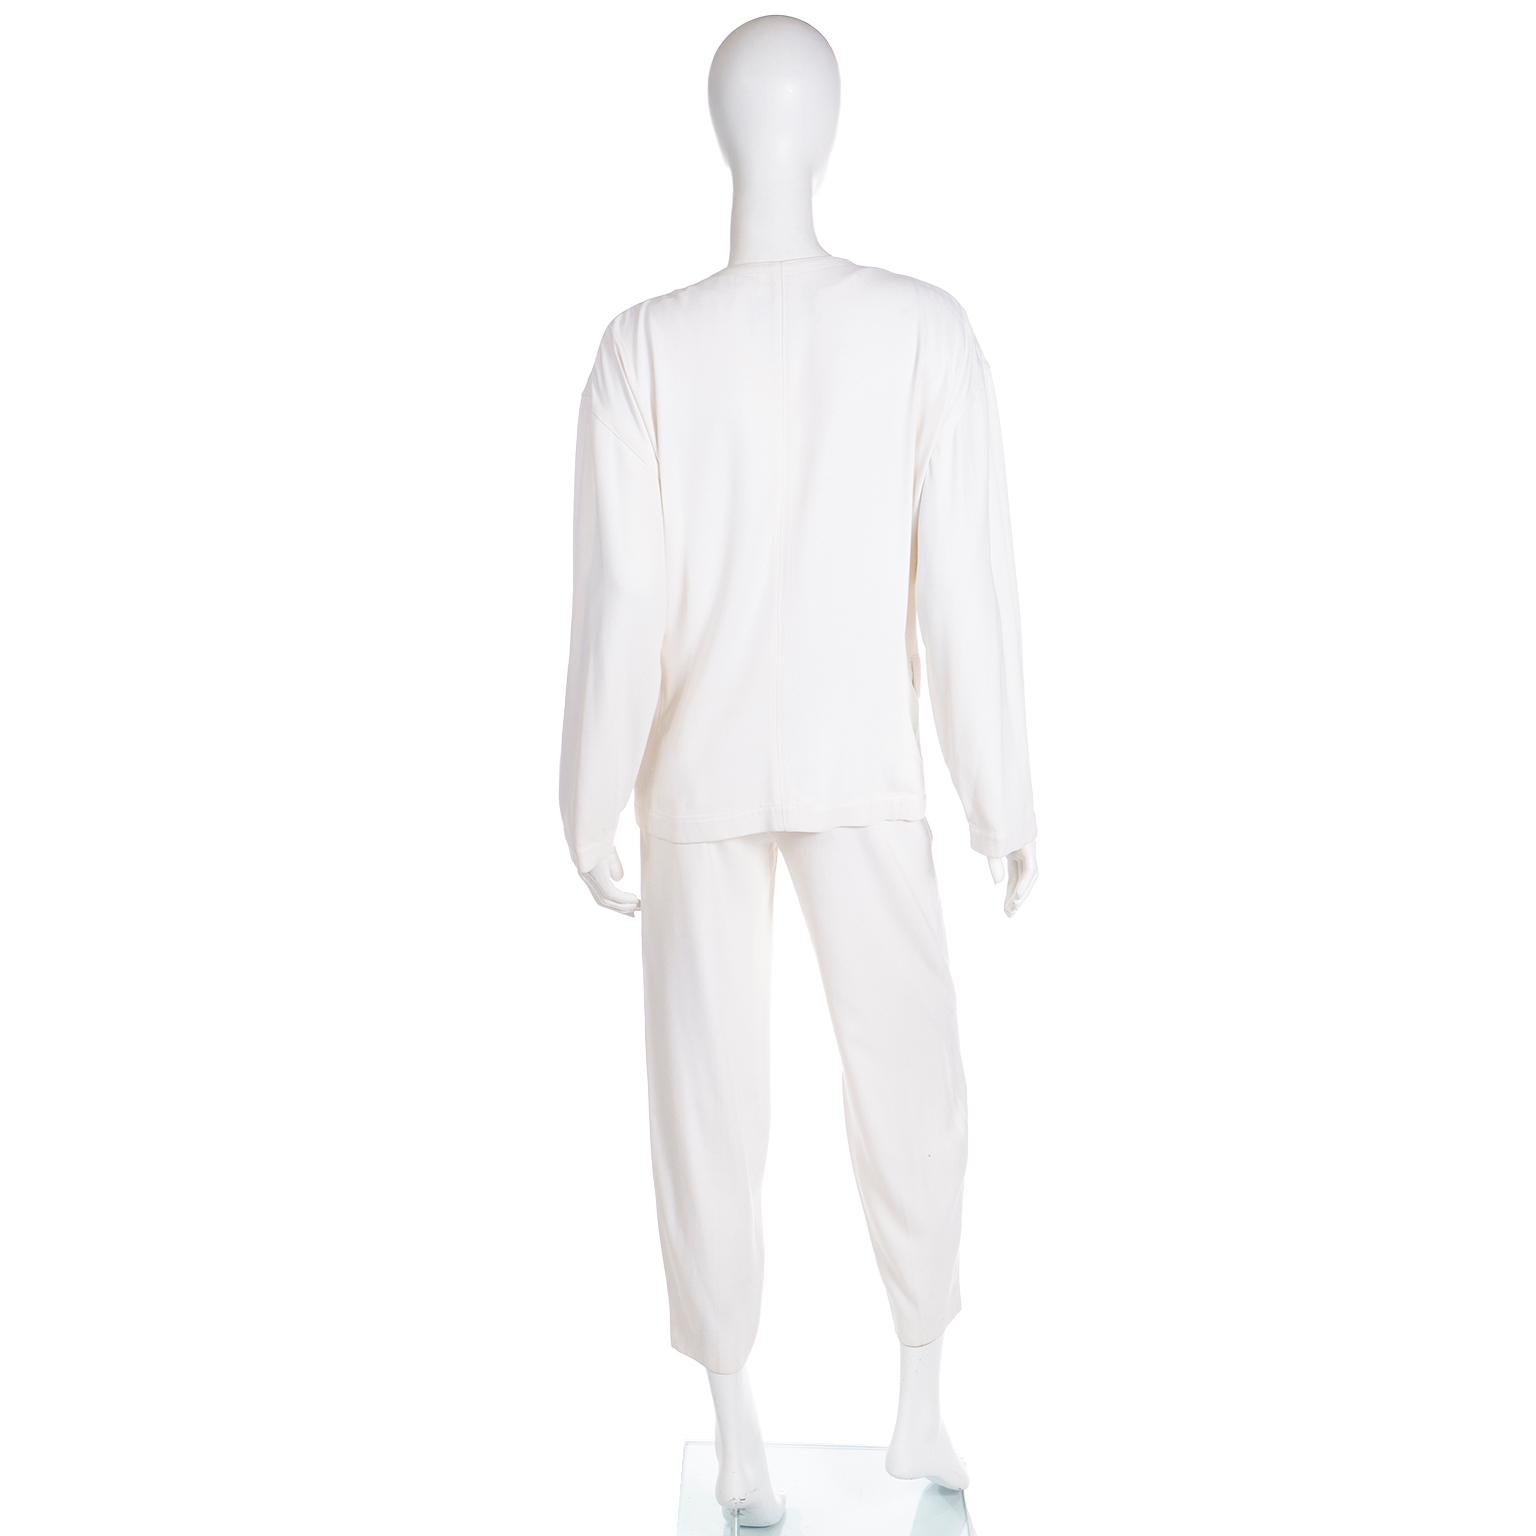 Thierry Mugler Vintage White 2 Pc Suit Jacket & Trousers Outfit  For Sale 1